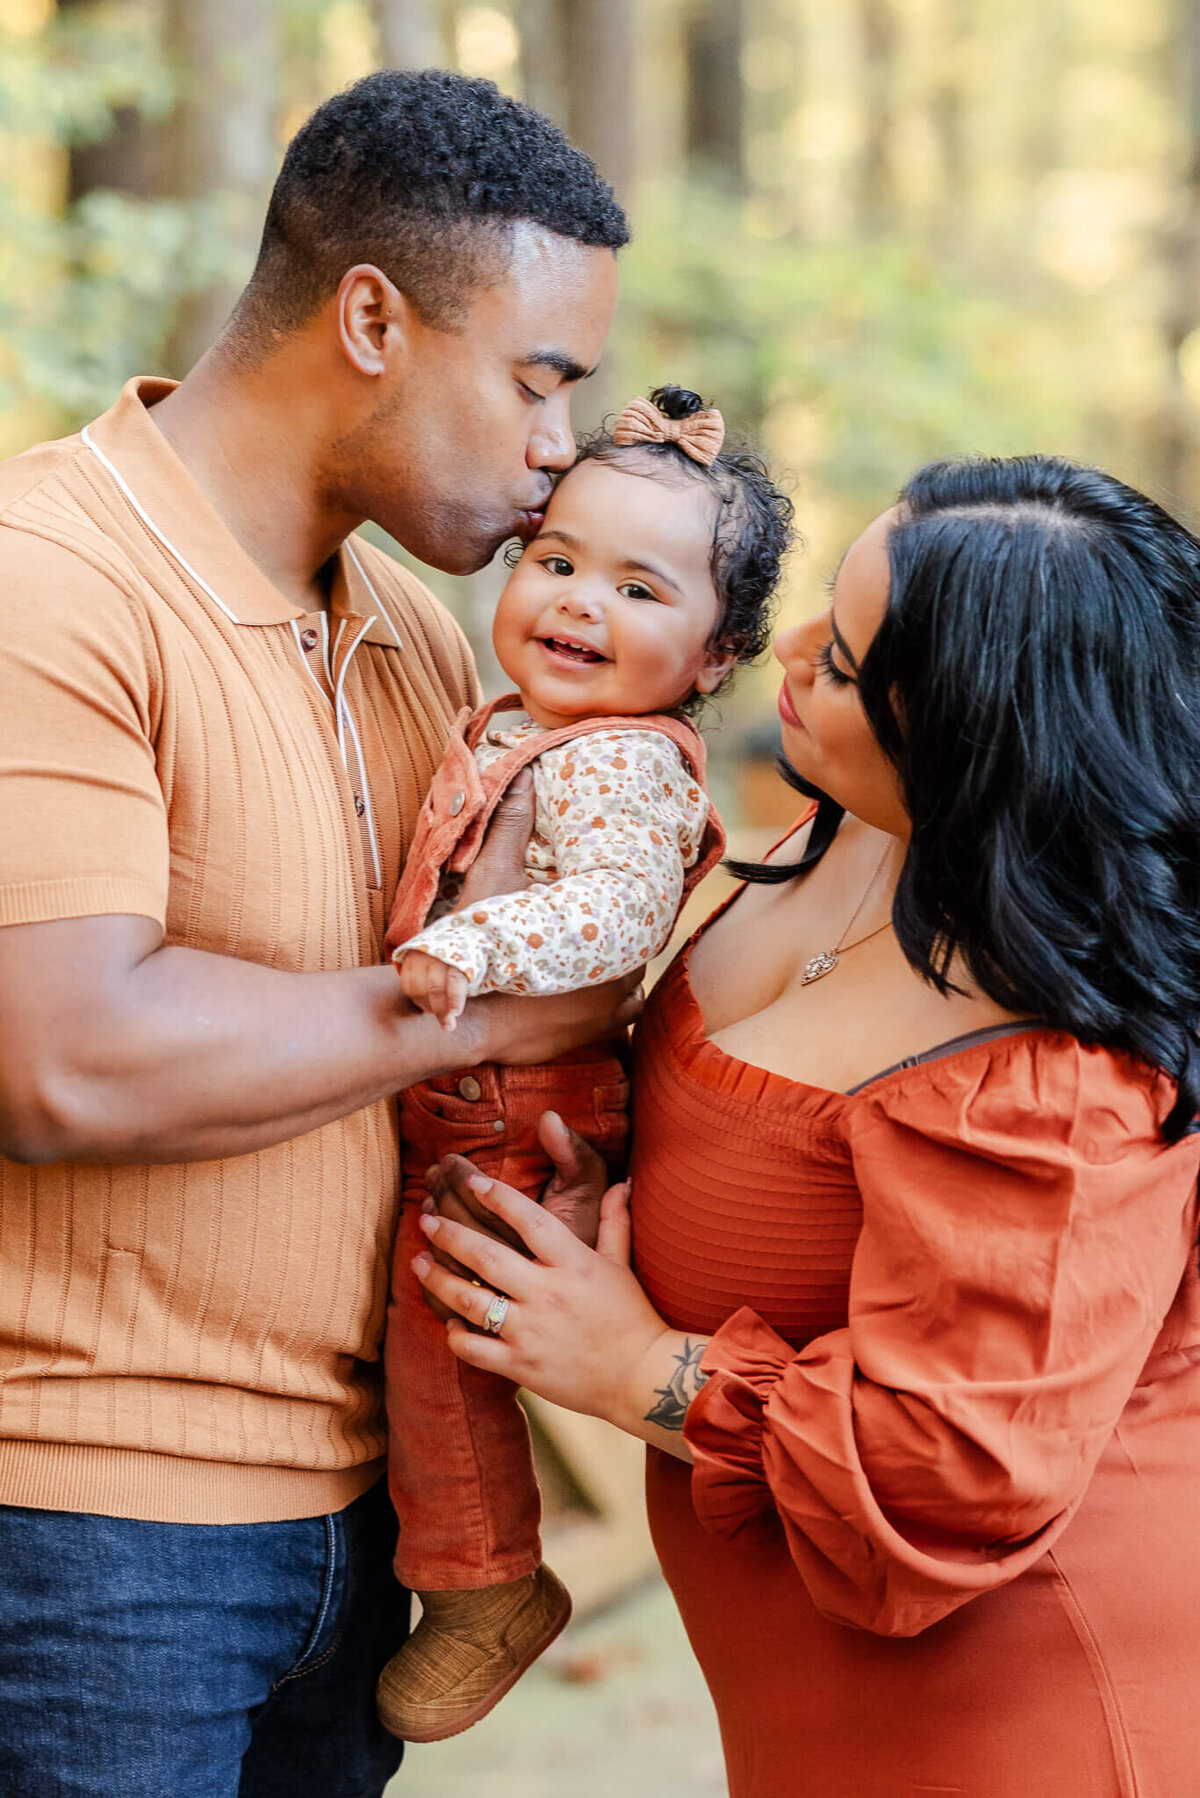 A dad kisses his toddler daughter on the forehead while the mom looks on lovingly during a family photo session.